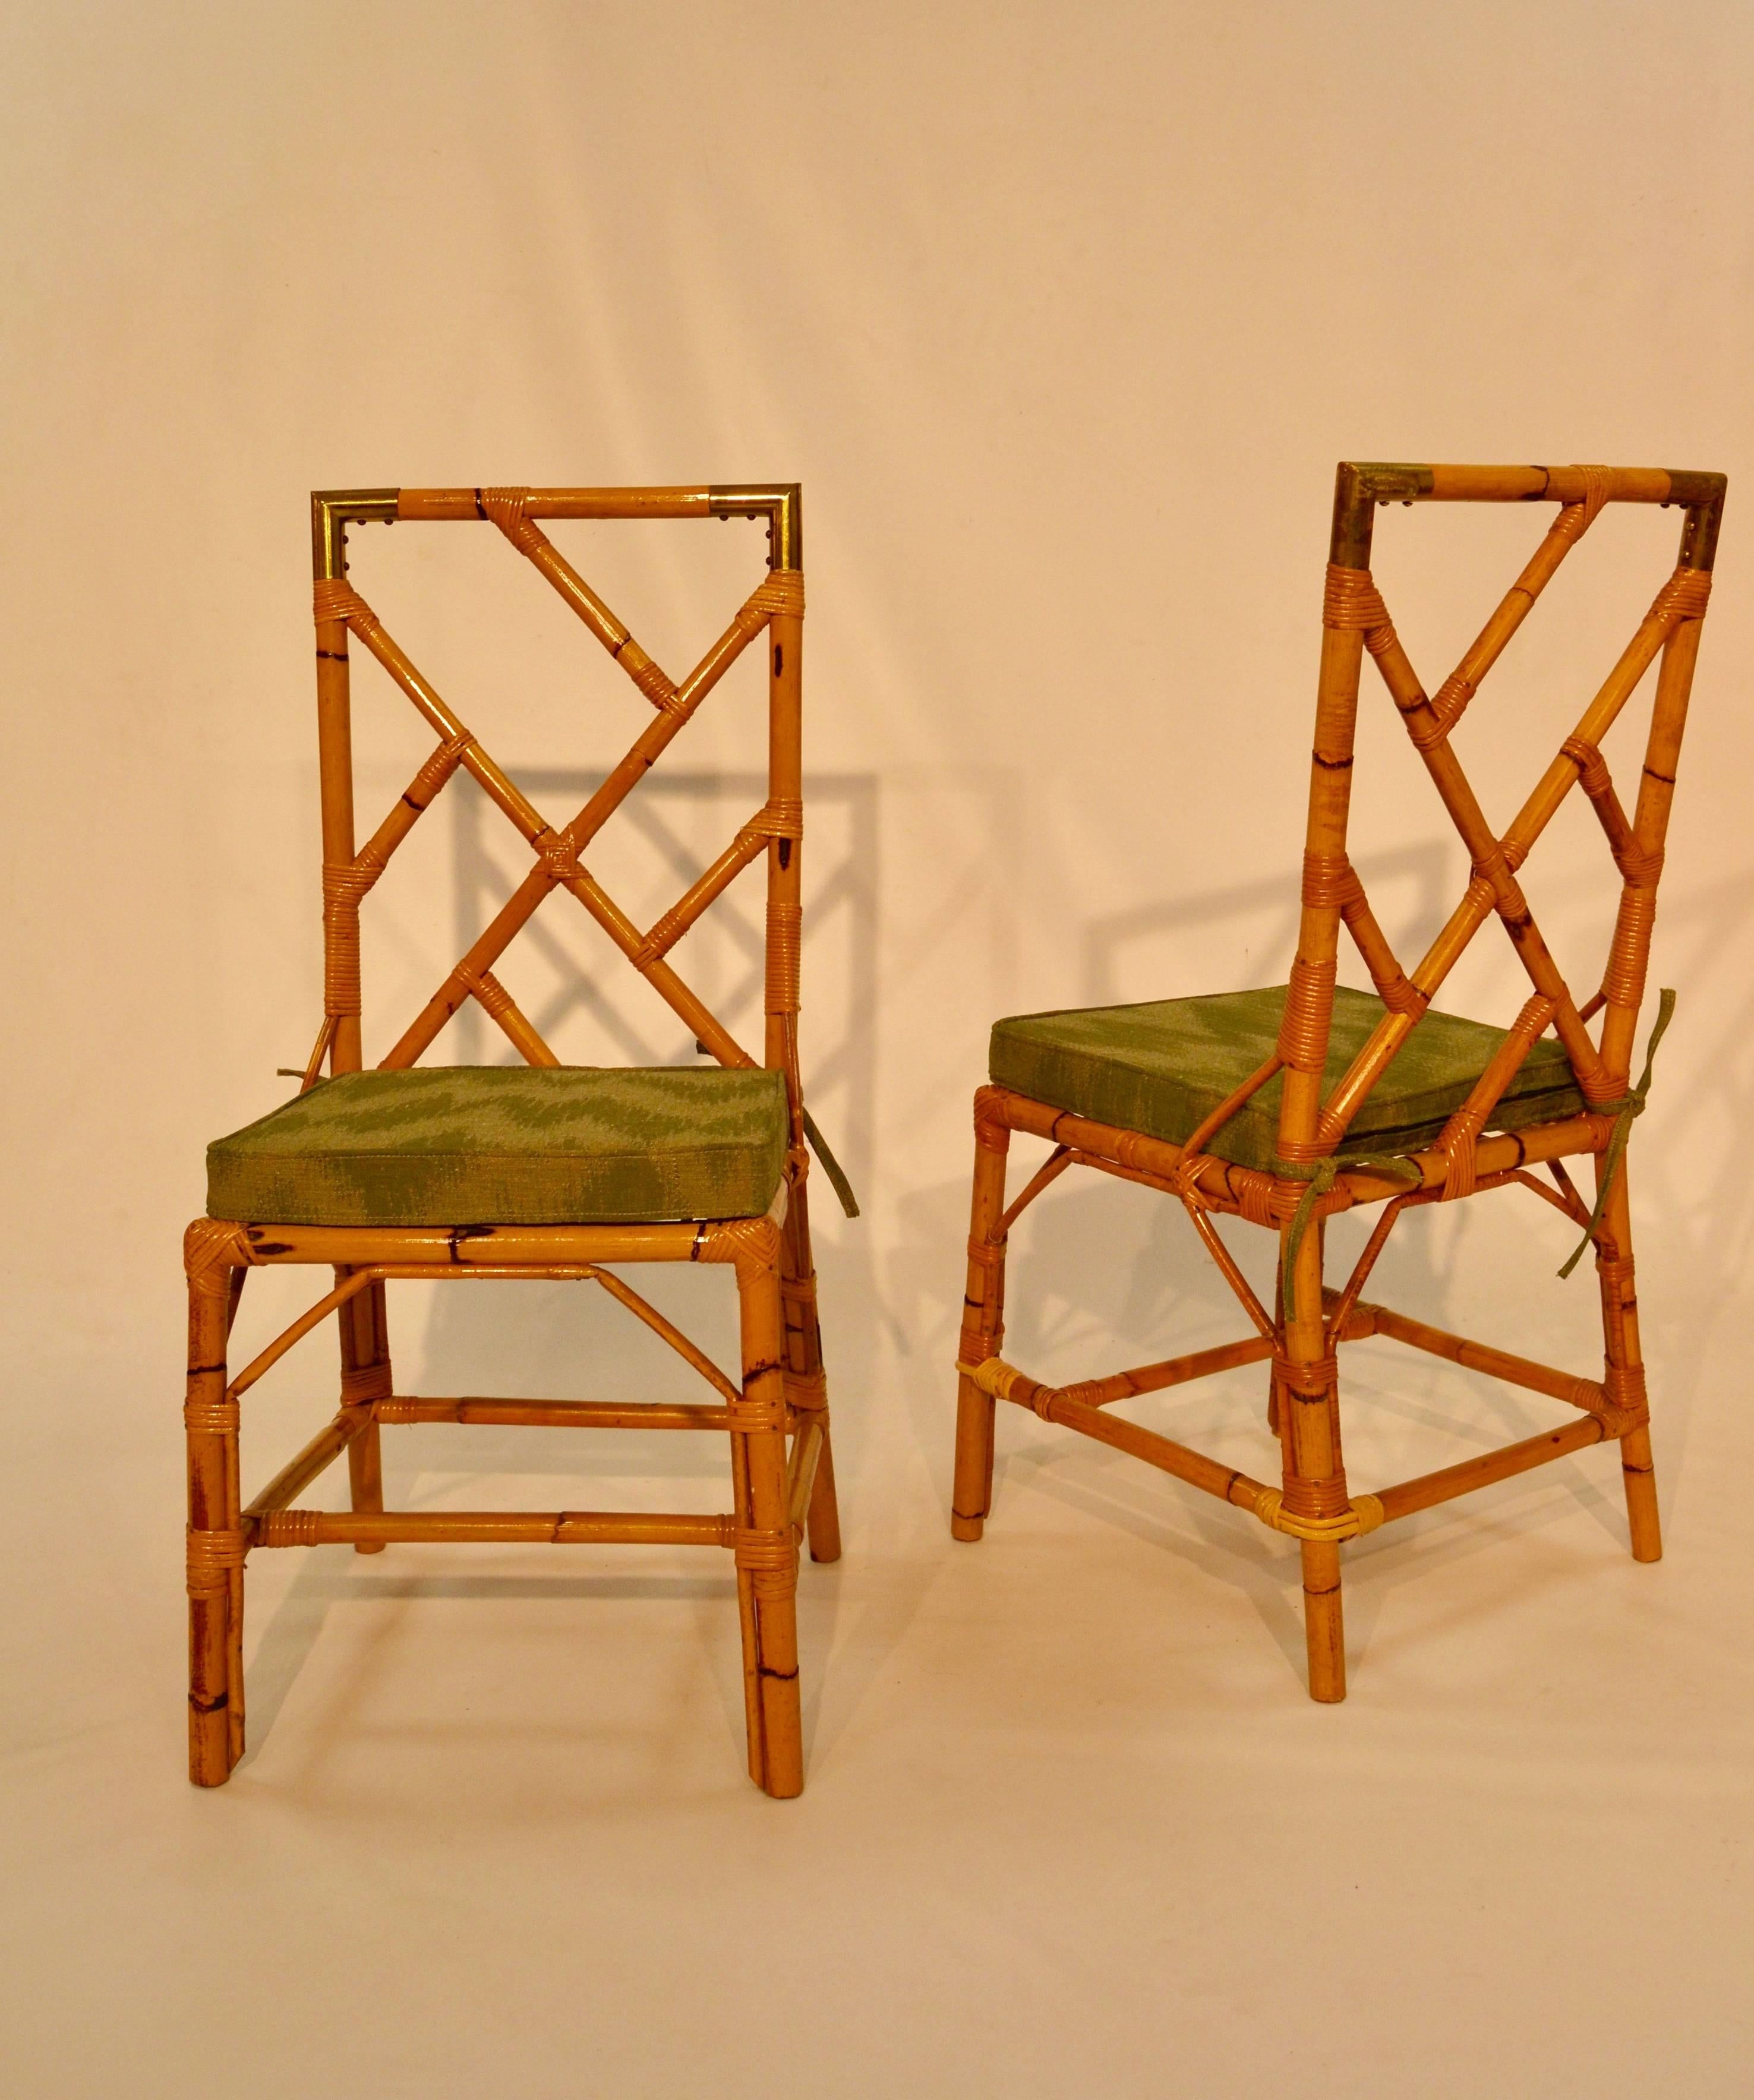 Four chairs in bamboo and brass details
New upholstered with Gaston Y Daniela fabric.